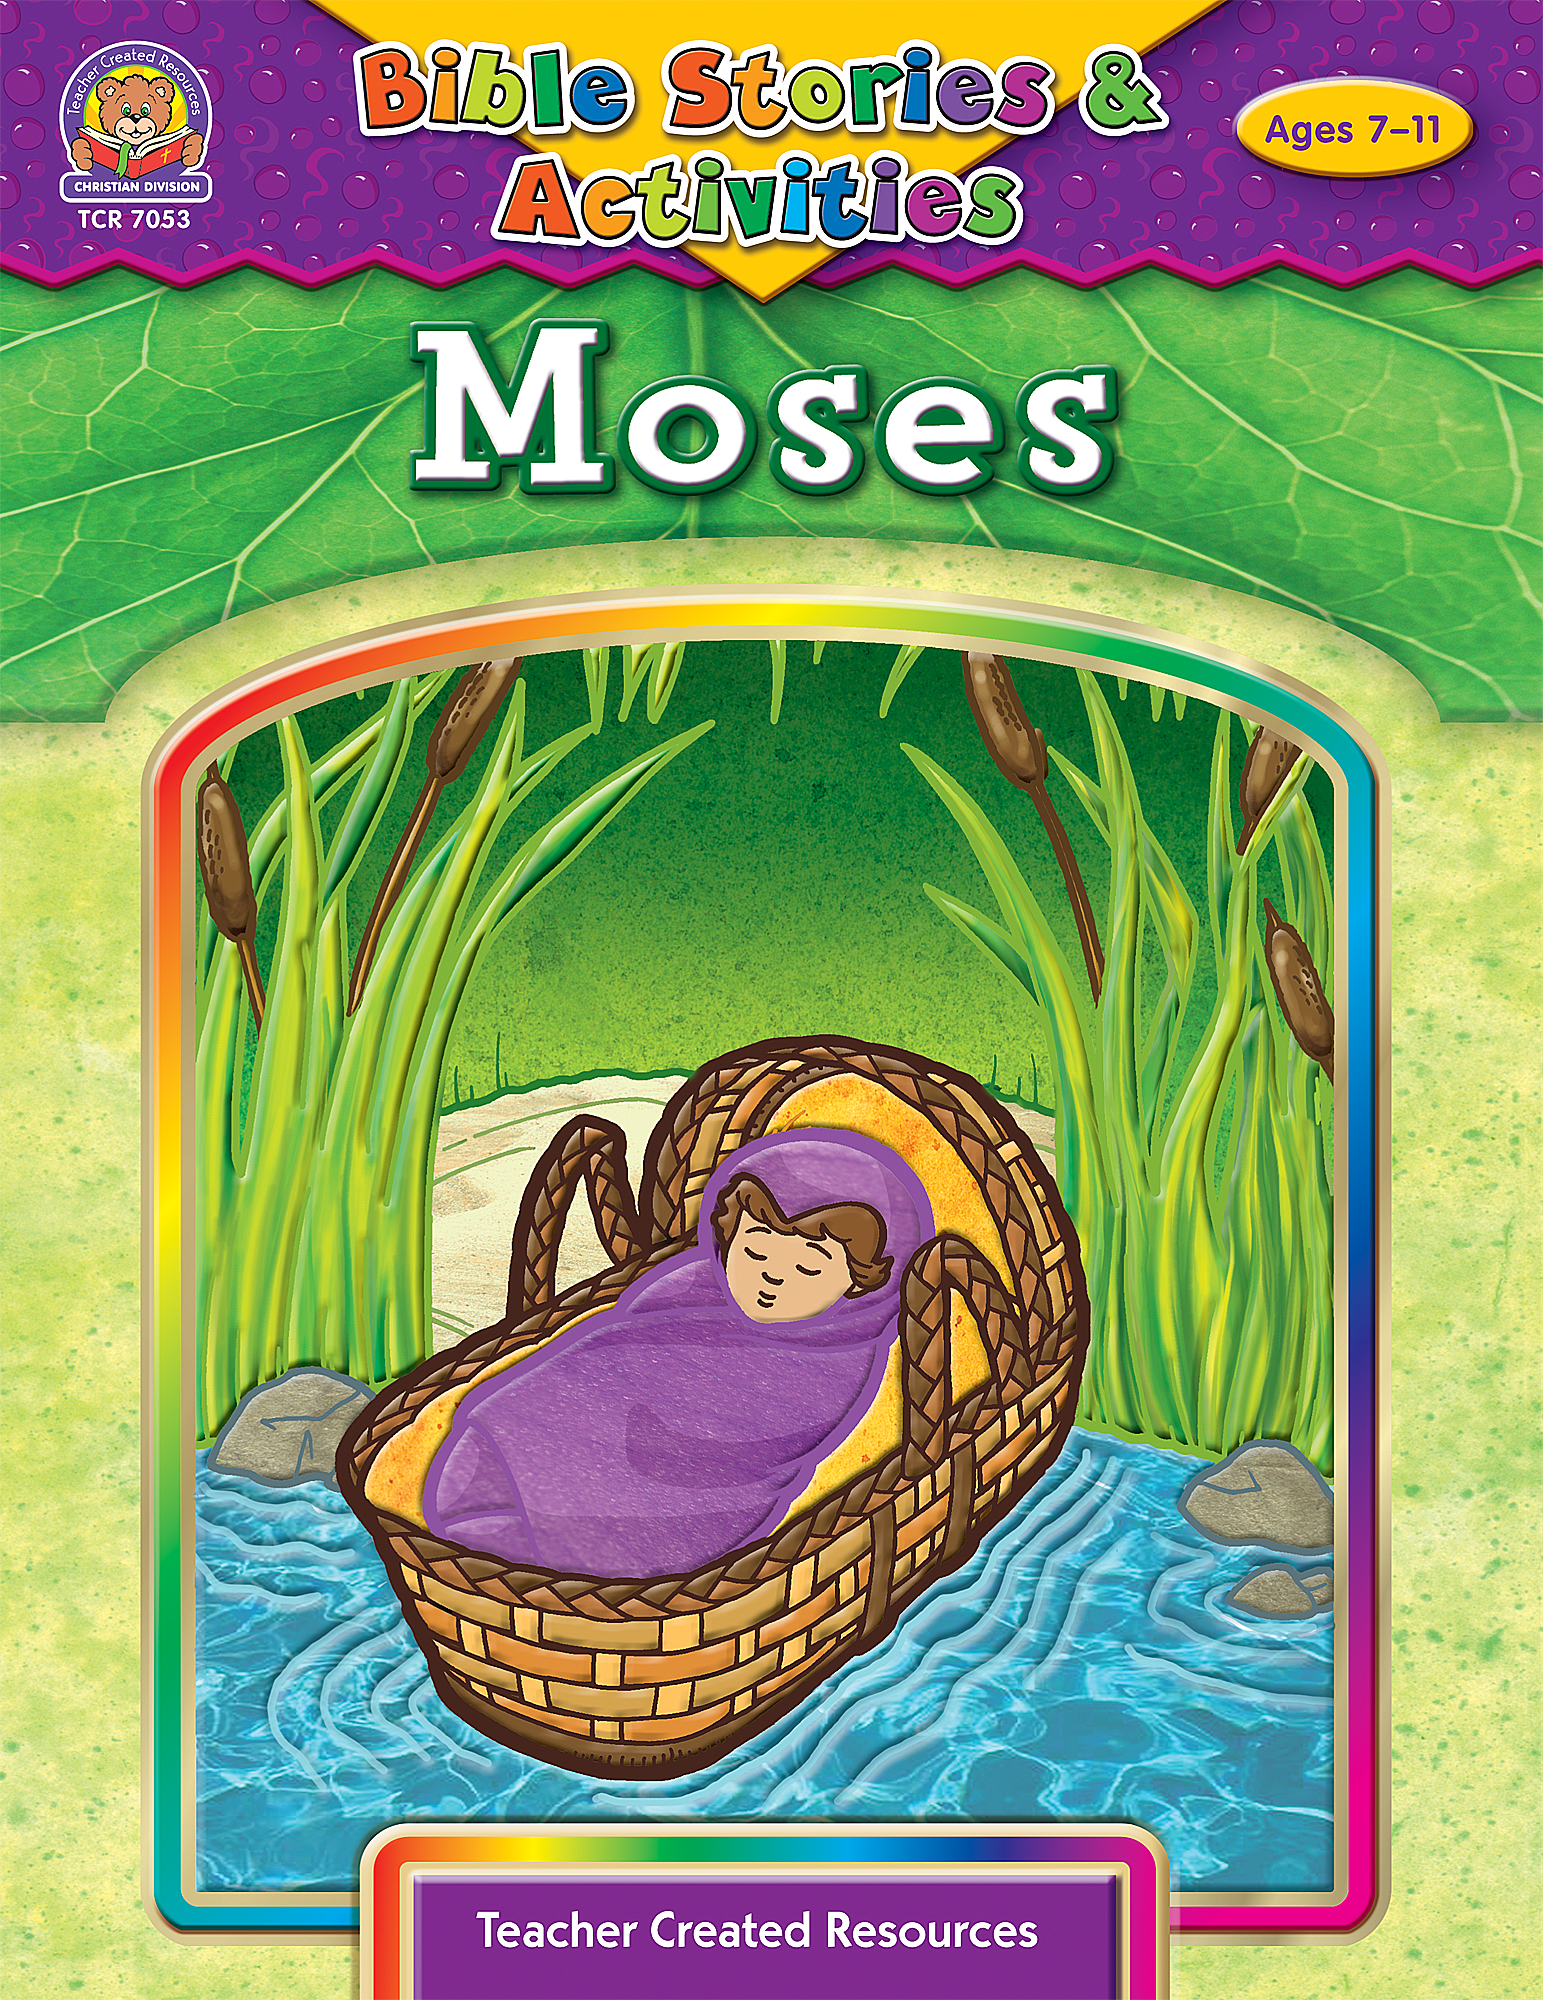 Bible Stories & Activities: Moses - TCR7053 | Teacher Created Resources